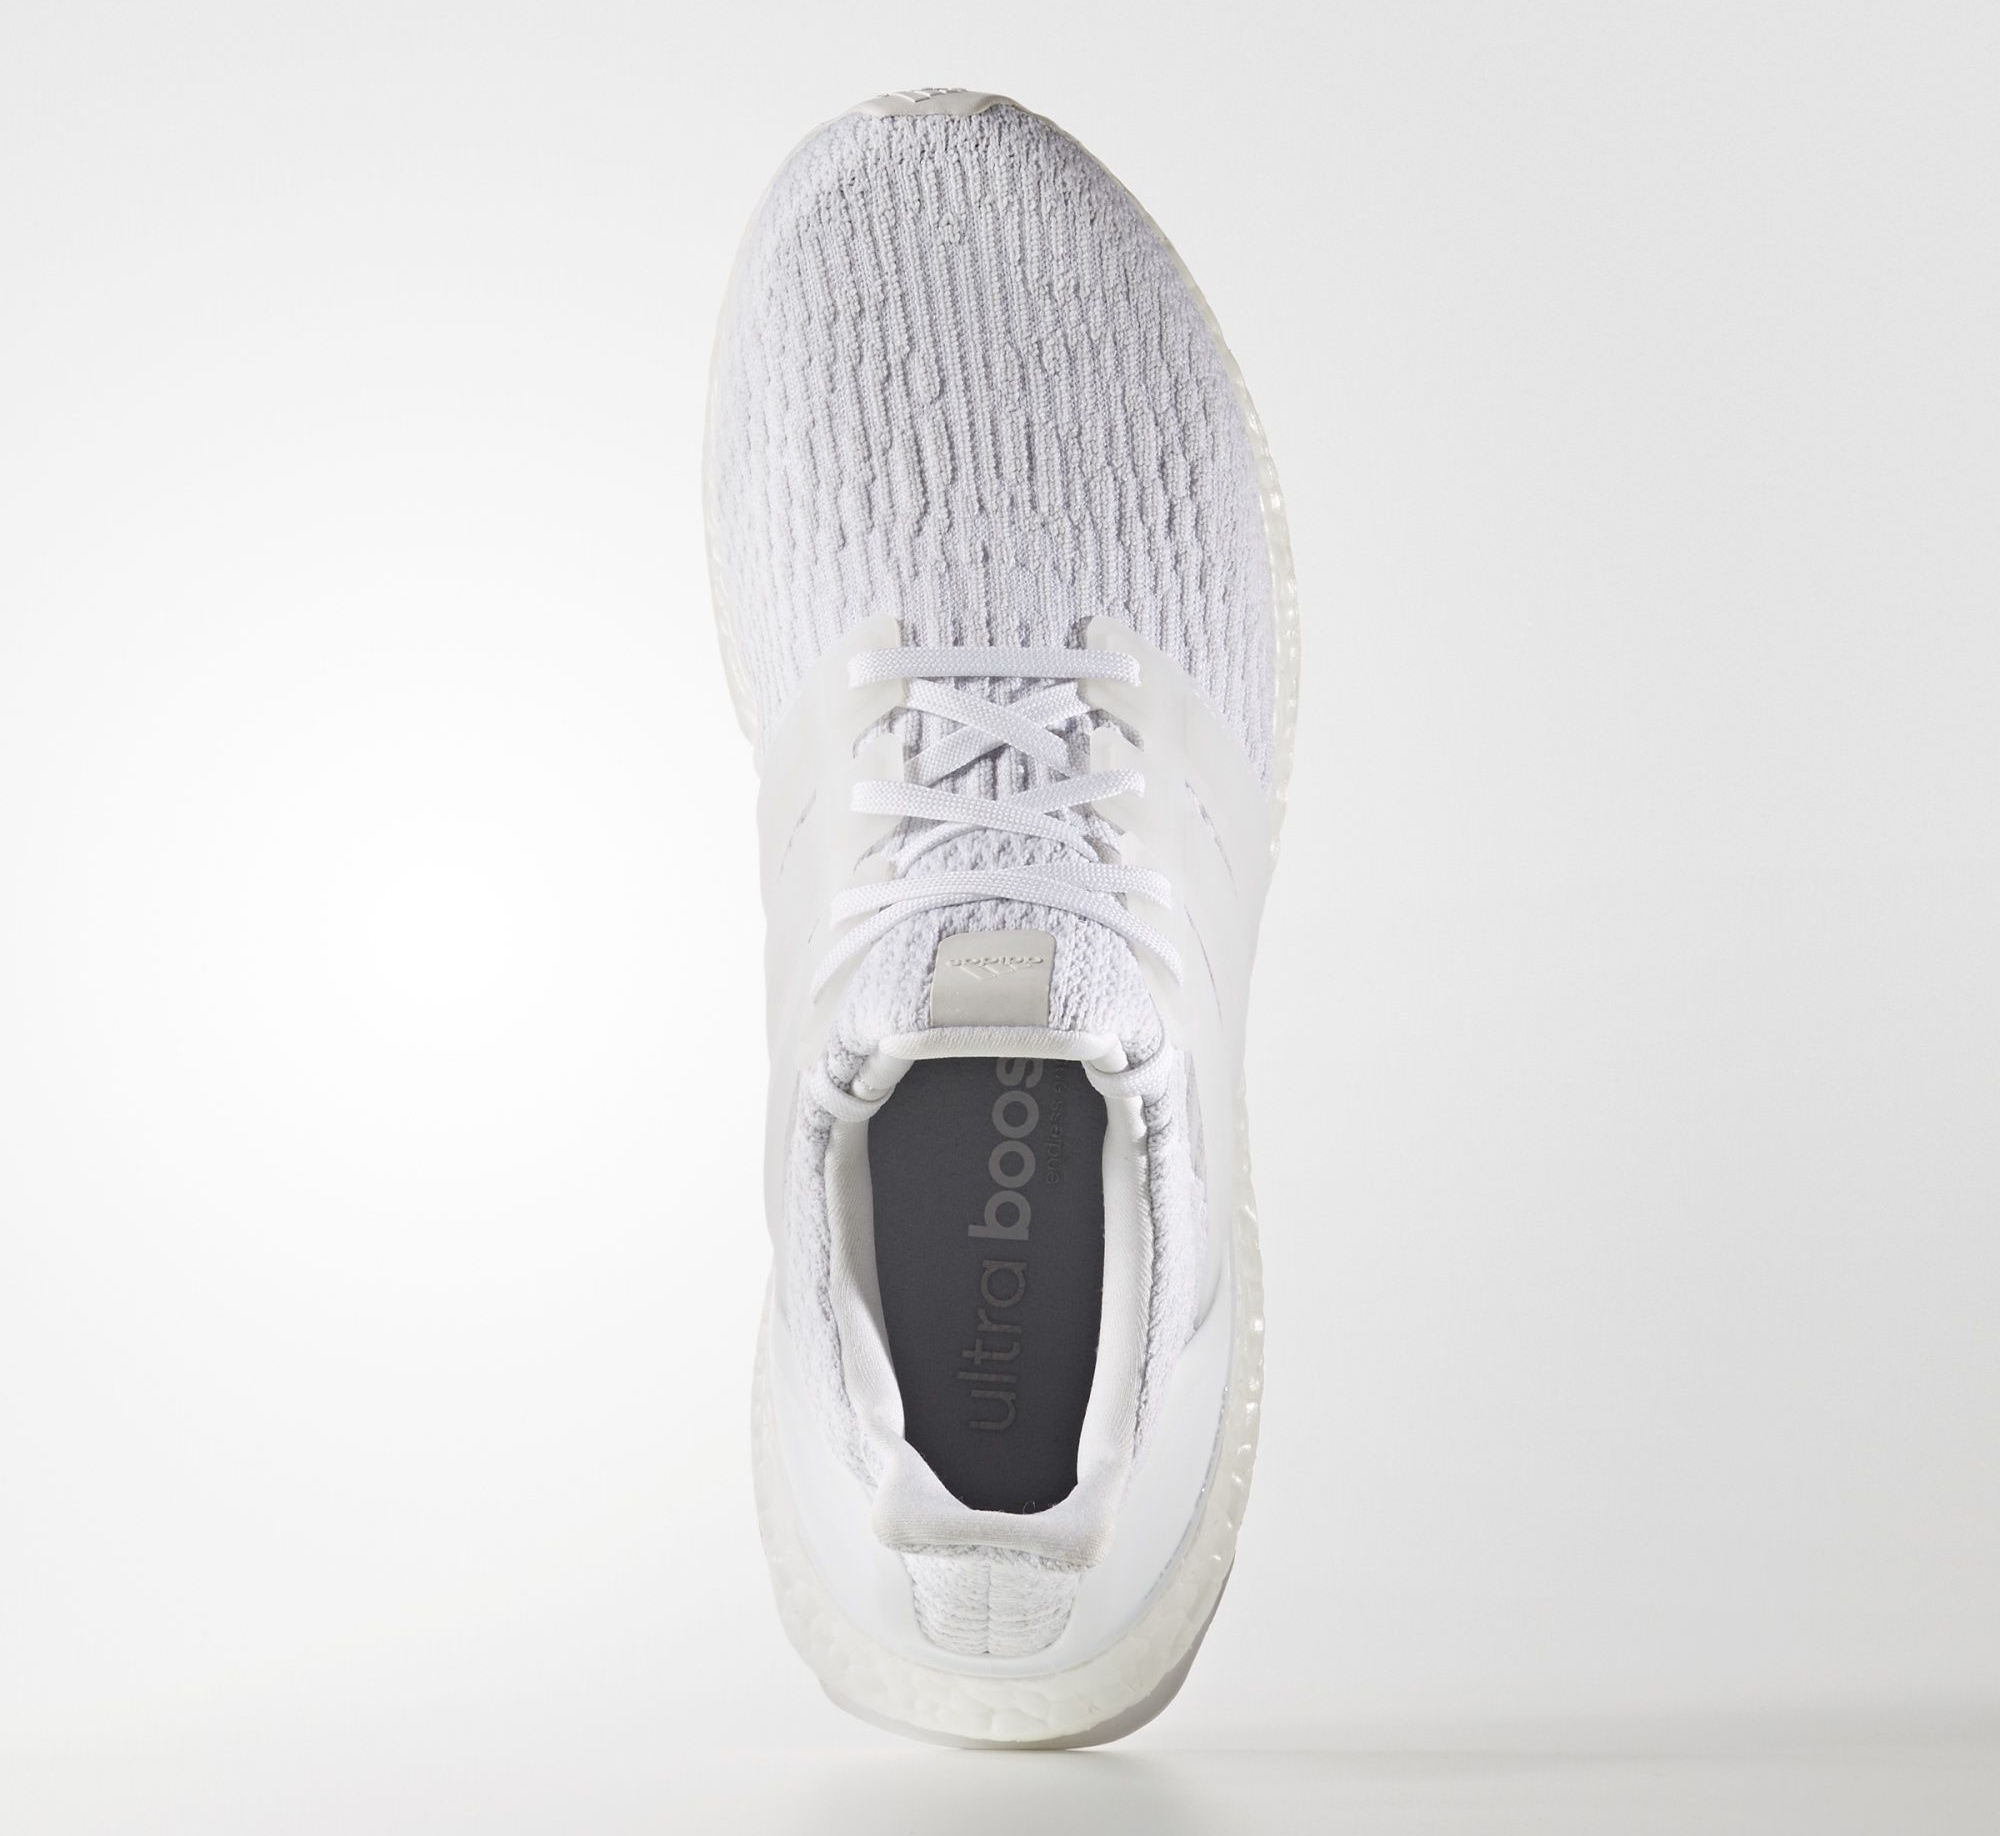 adidas ultra boost triple white 3.0 release date